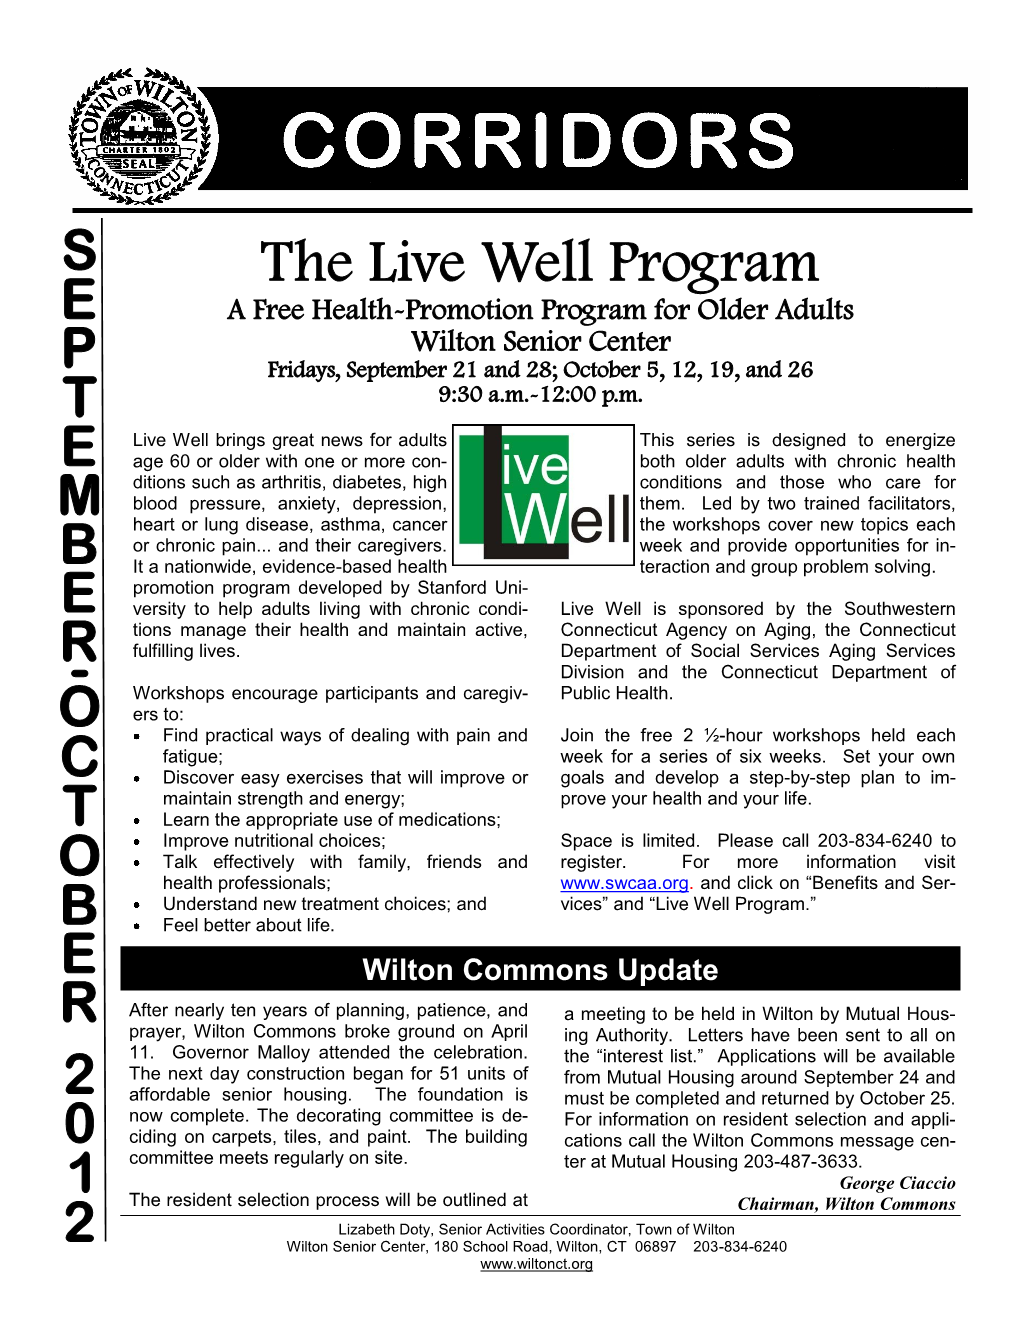 The Live Well Program